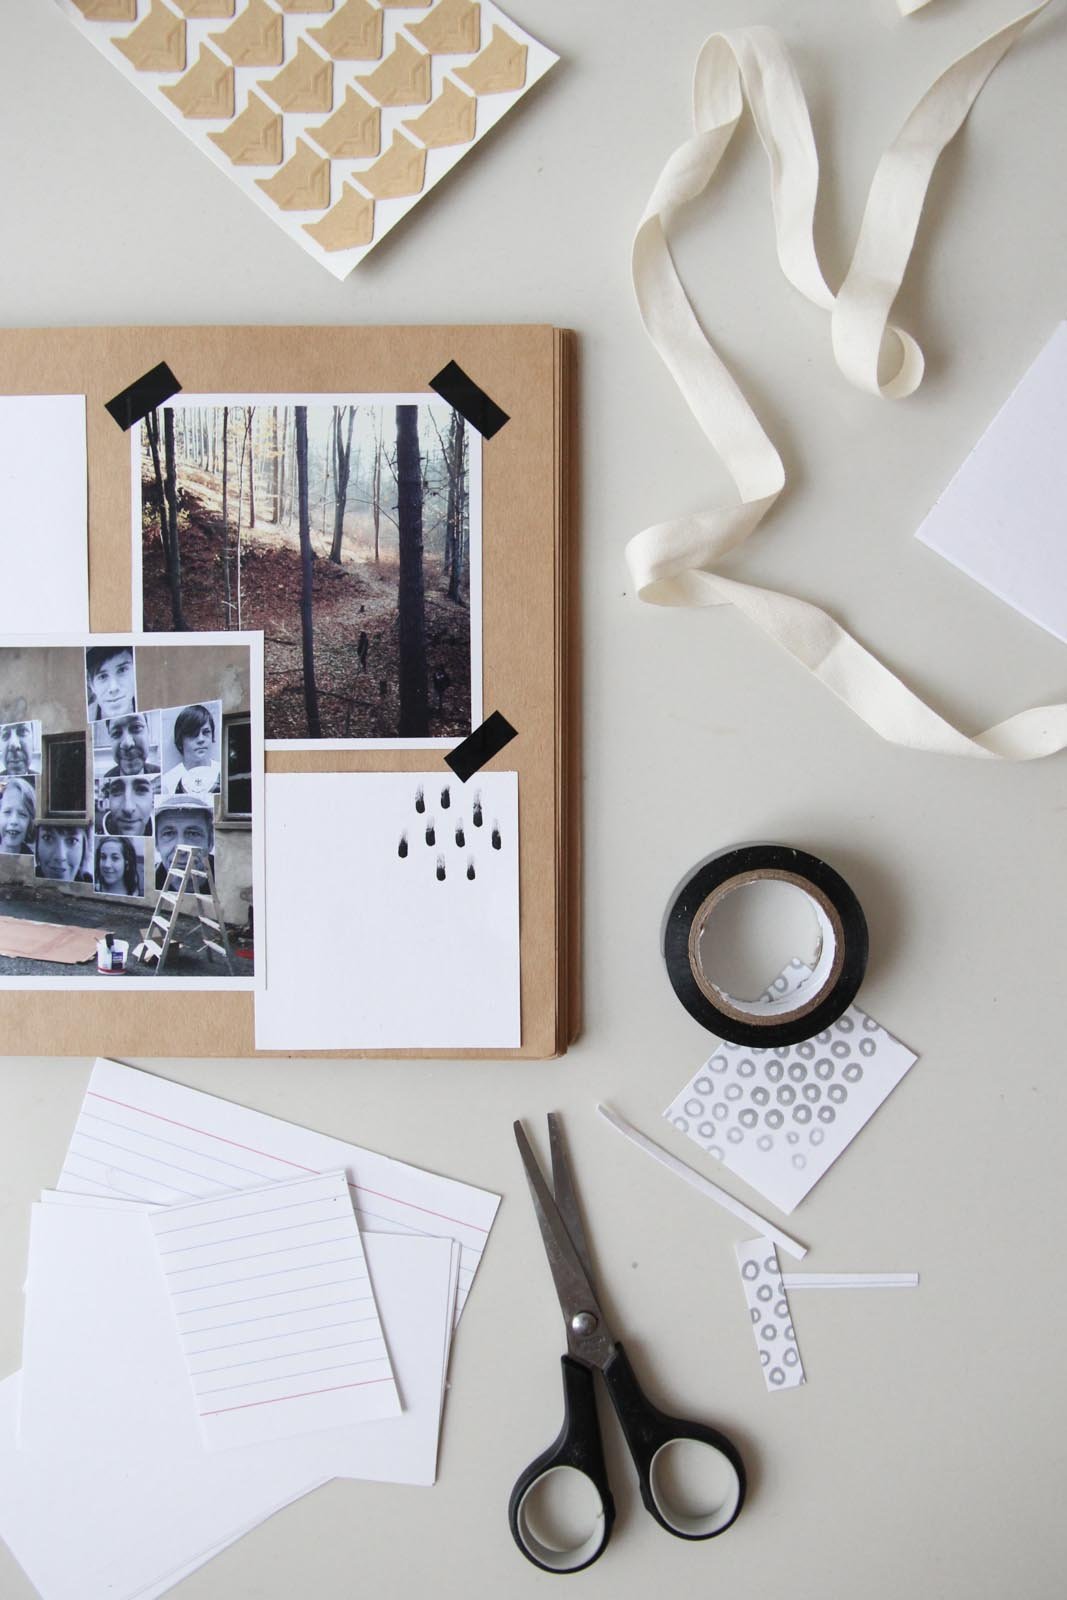 10+ Tips on How to Scrapbook Like a Pro — Root & Branch Paper Co.